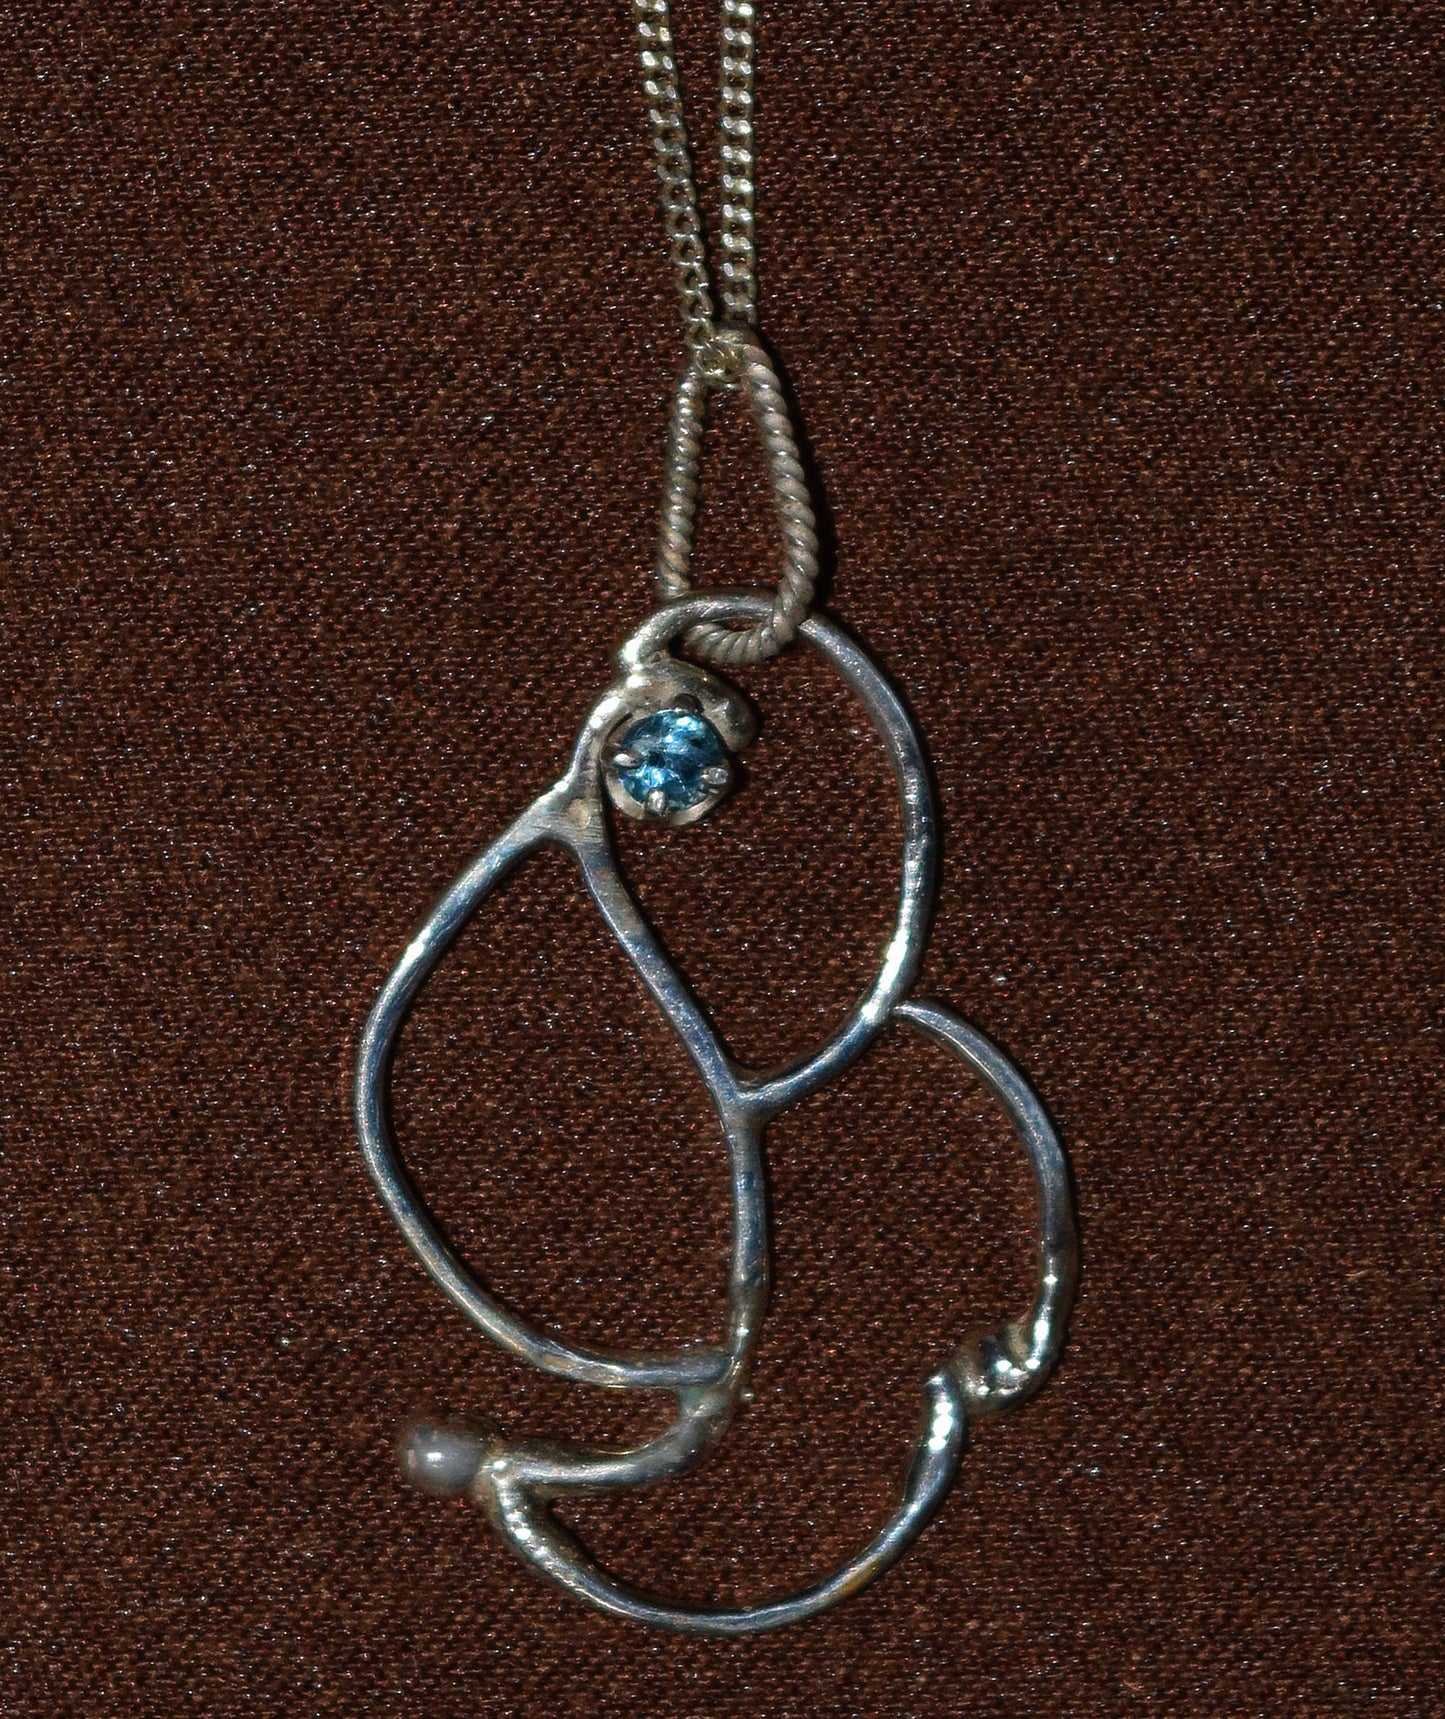 Handcrafted Sterling Silver pendant featuring a Blue Topaz stone.